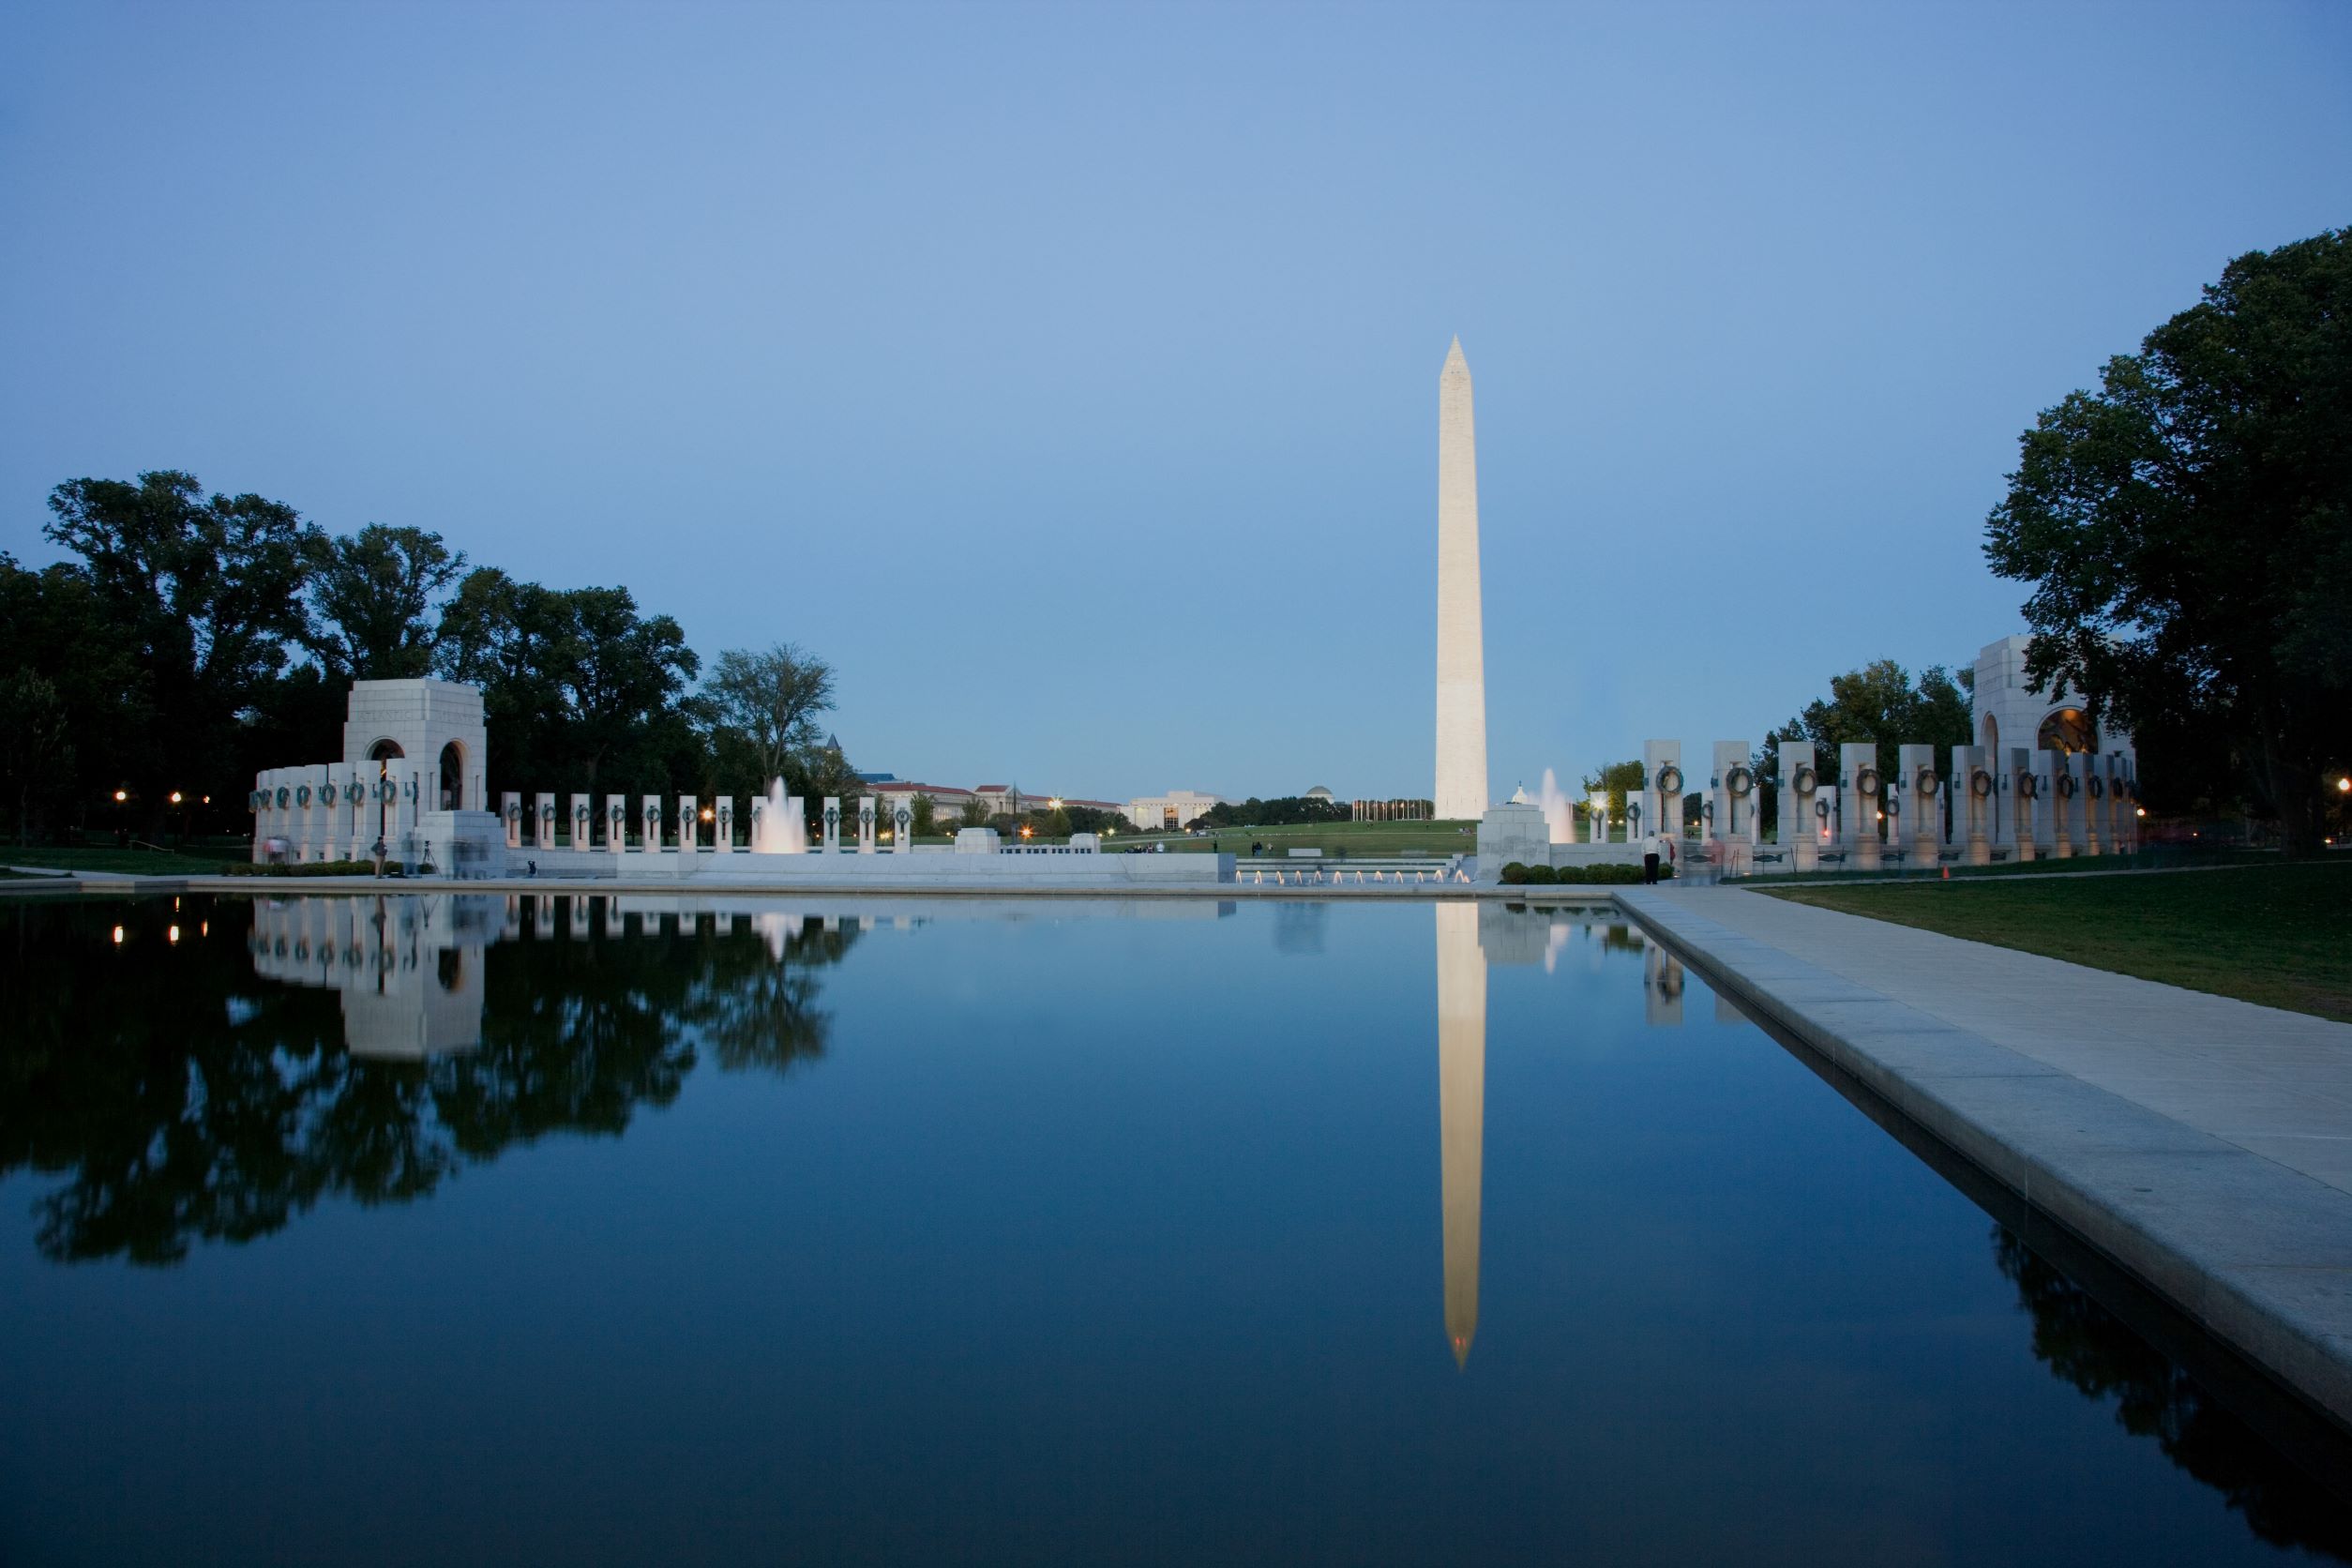 The Washington monument and the reflecting pool at the National Mall in Washington, DC.